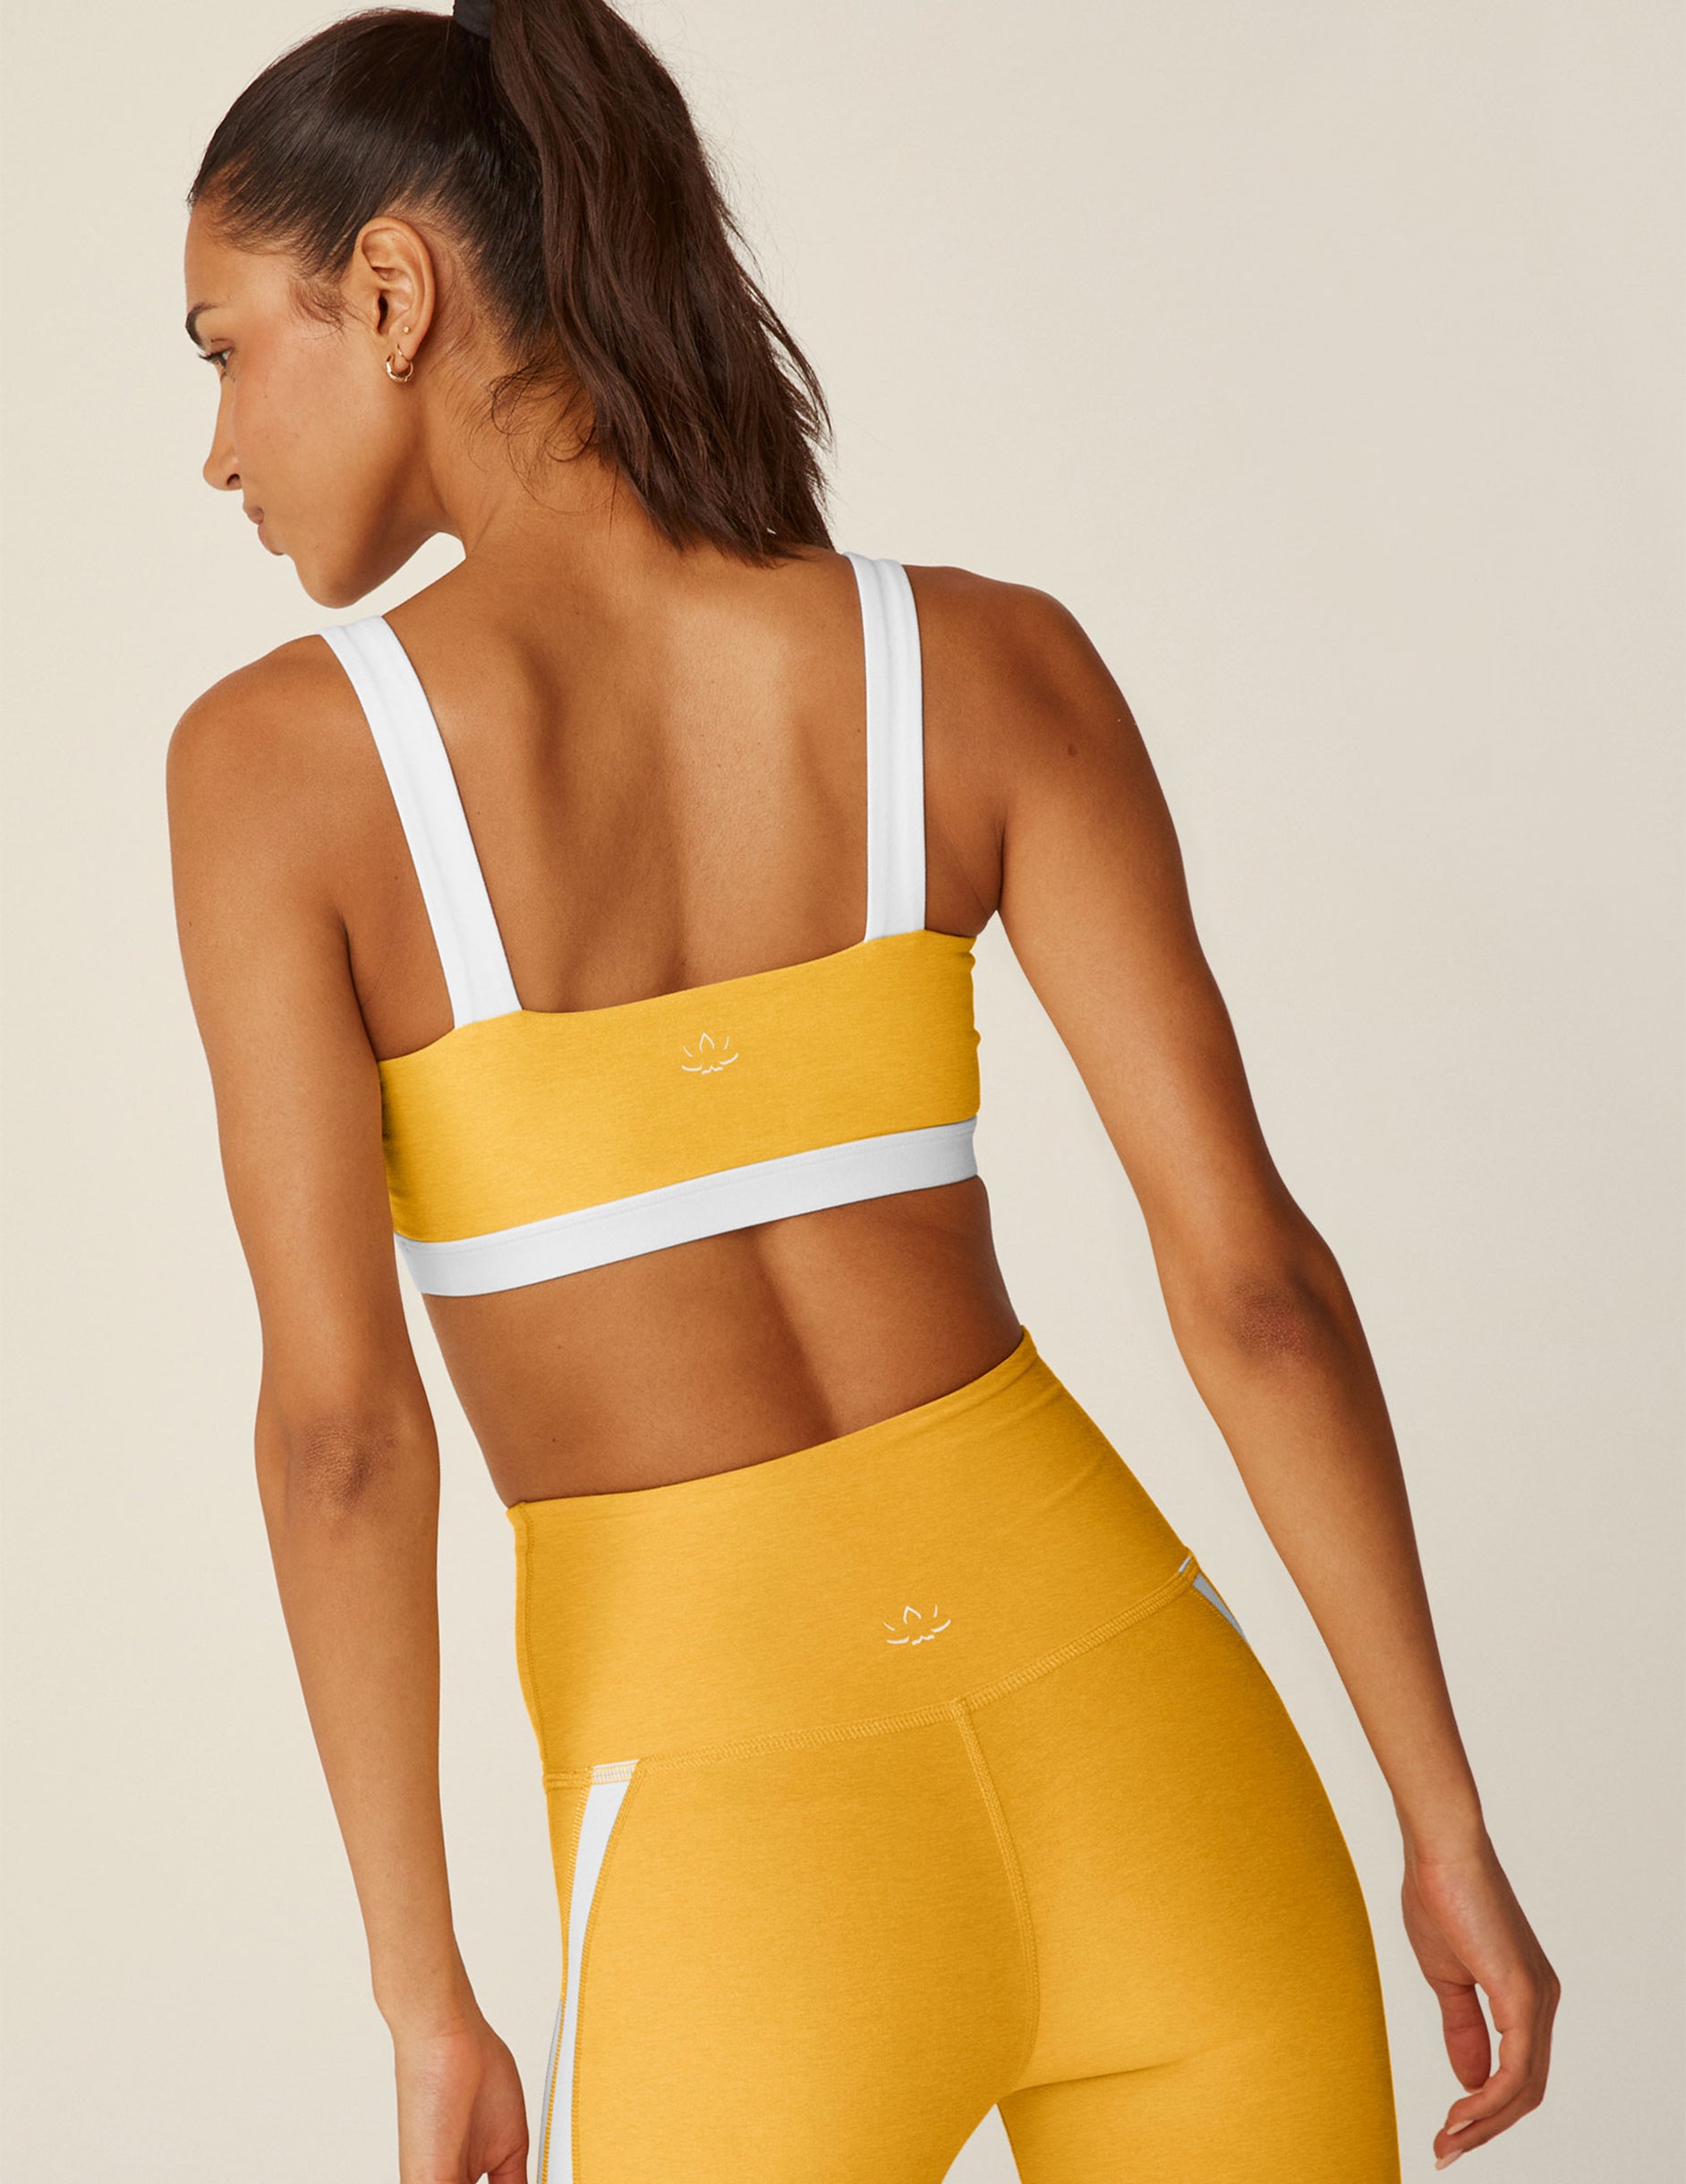 yellow spacedye bra top with white outlining.